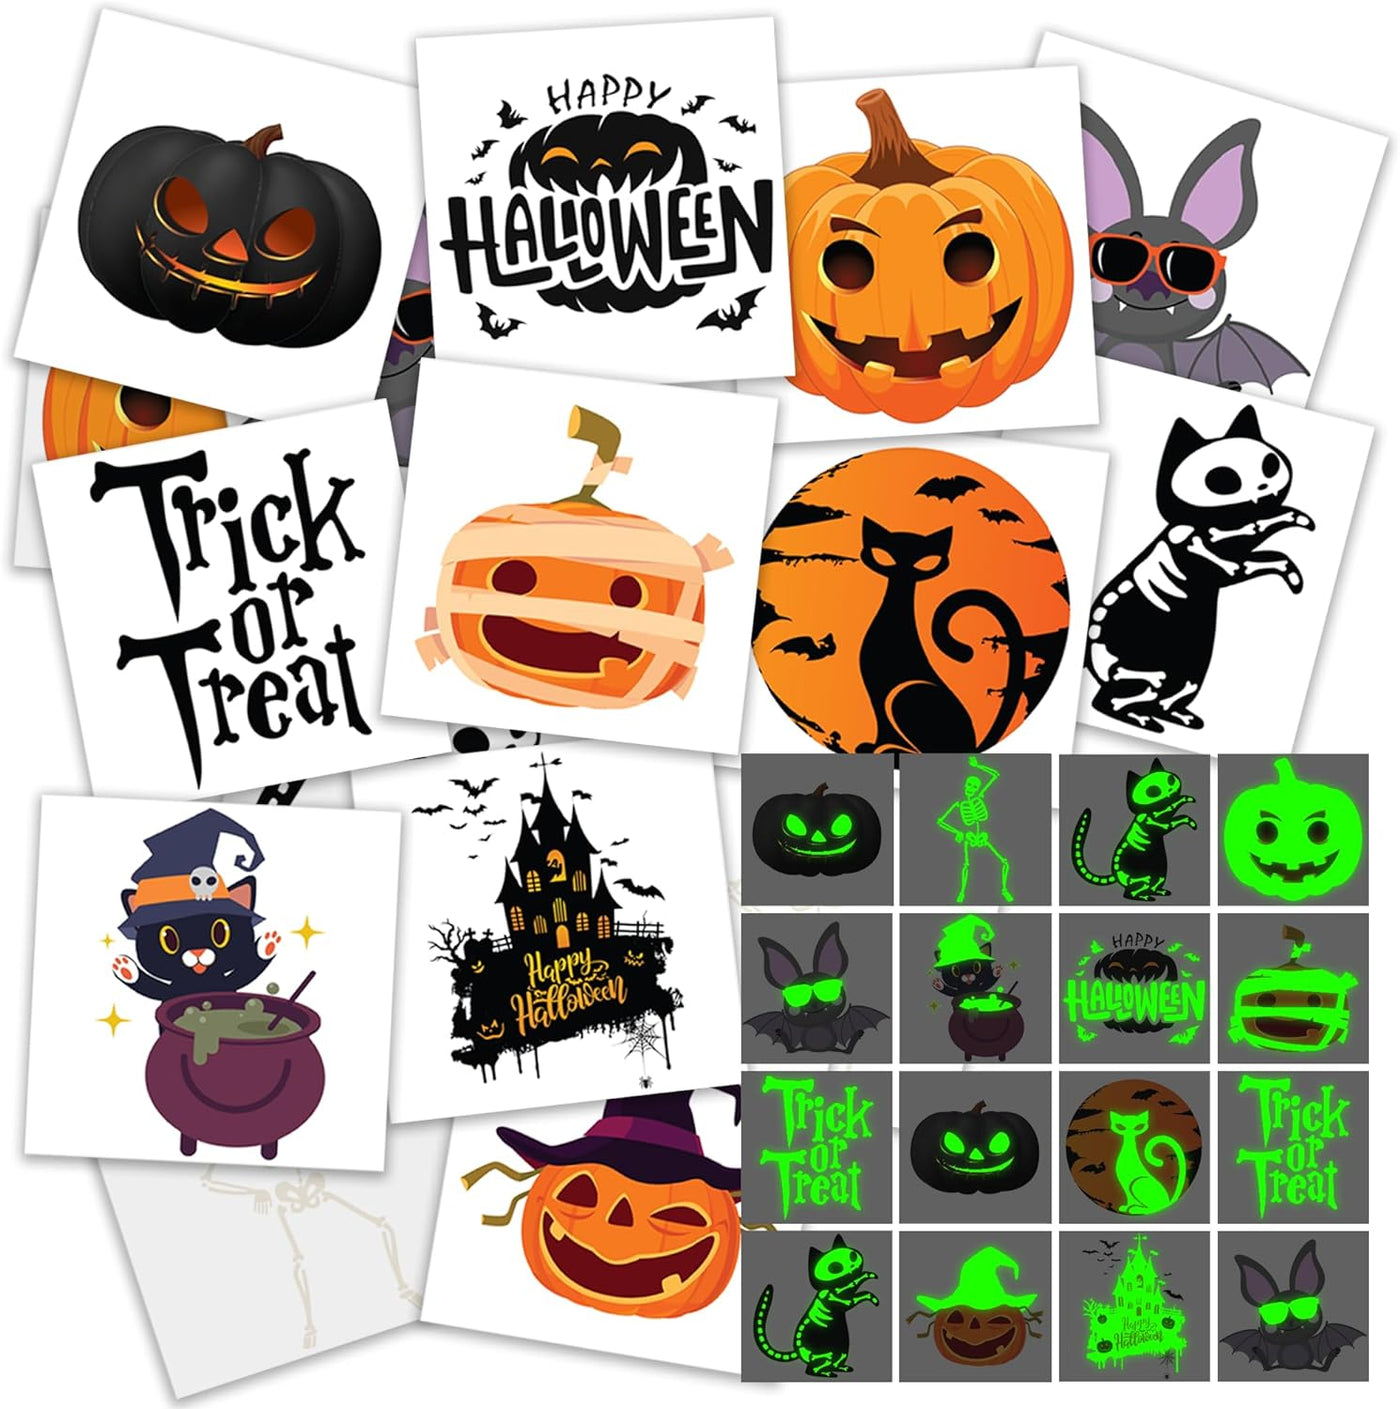 ArtCreativity Halloween Glow in the Dark Temporary Tattoos, Set of 144, Temporary Tats for Kids in 12 Spooky Designs, Easy to Apply & Remove, Halloween Party Favors for Kids, Trick or Treat Supplies